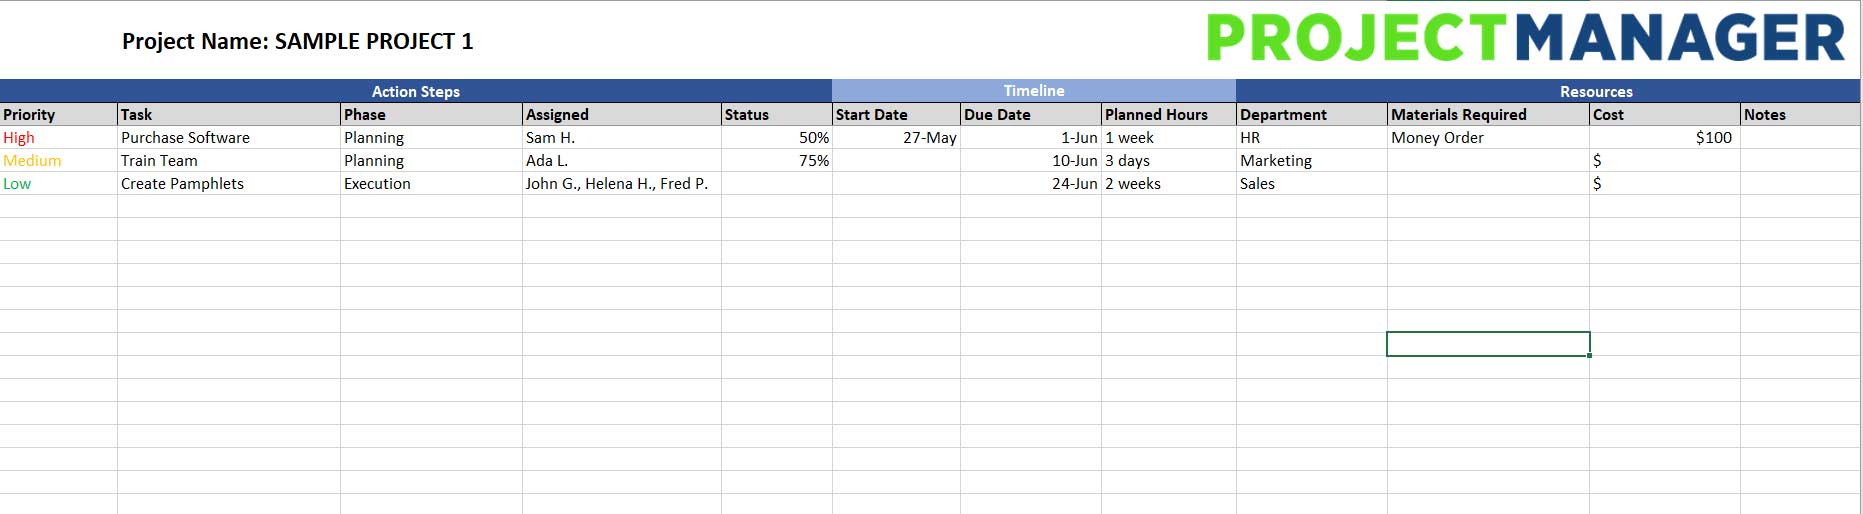 Template For Excel from www.projectmanager.com